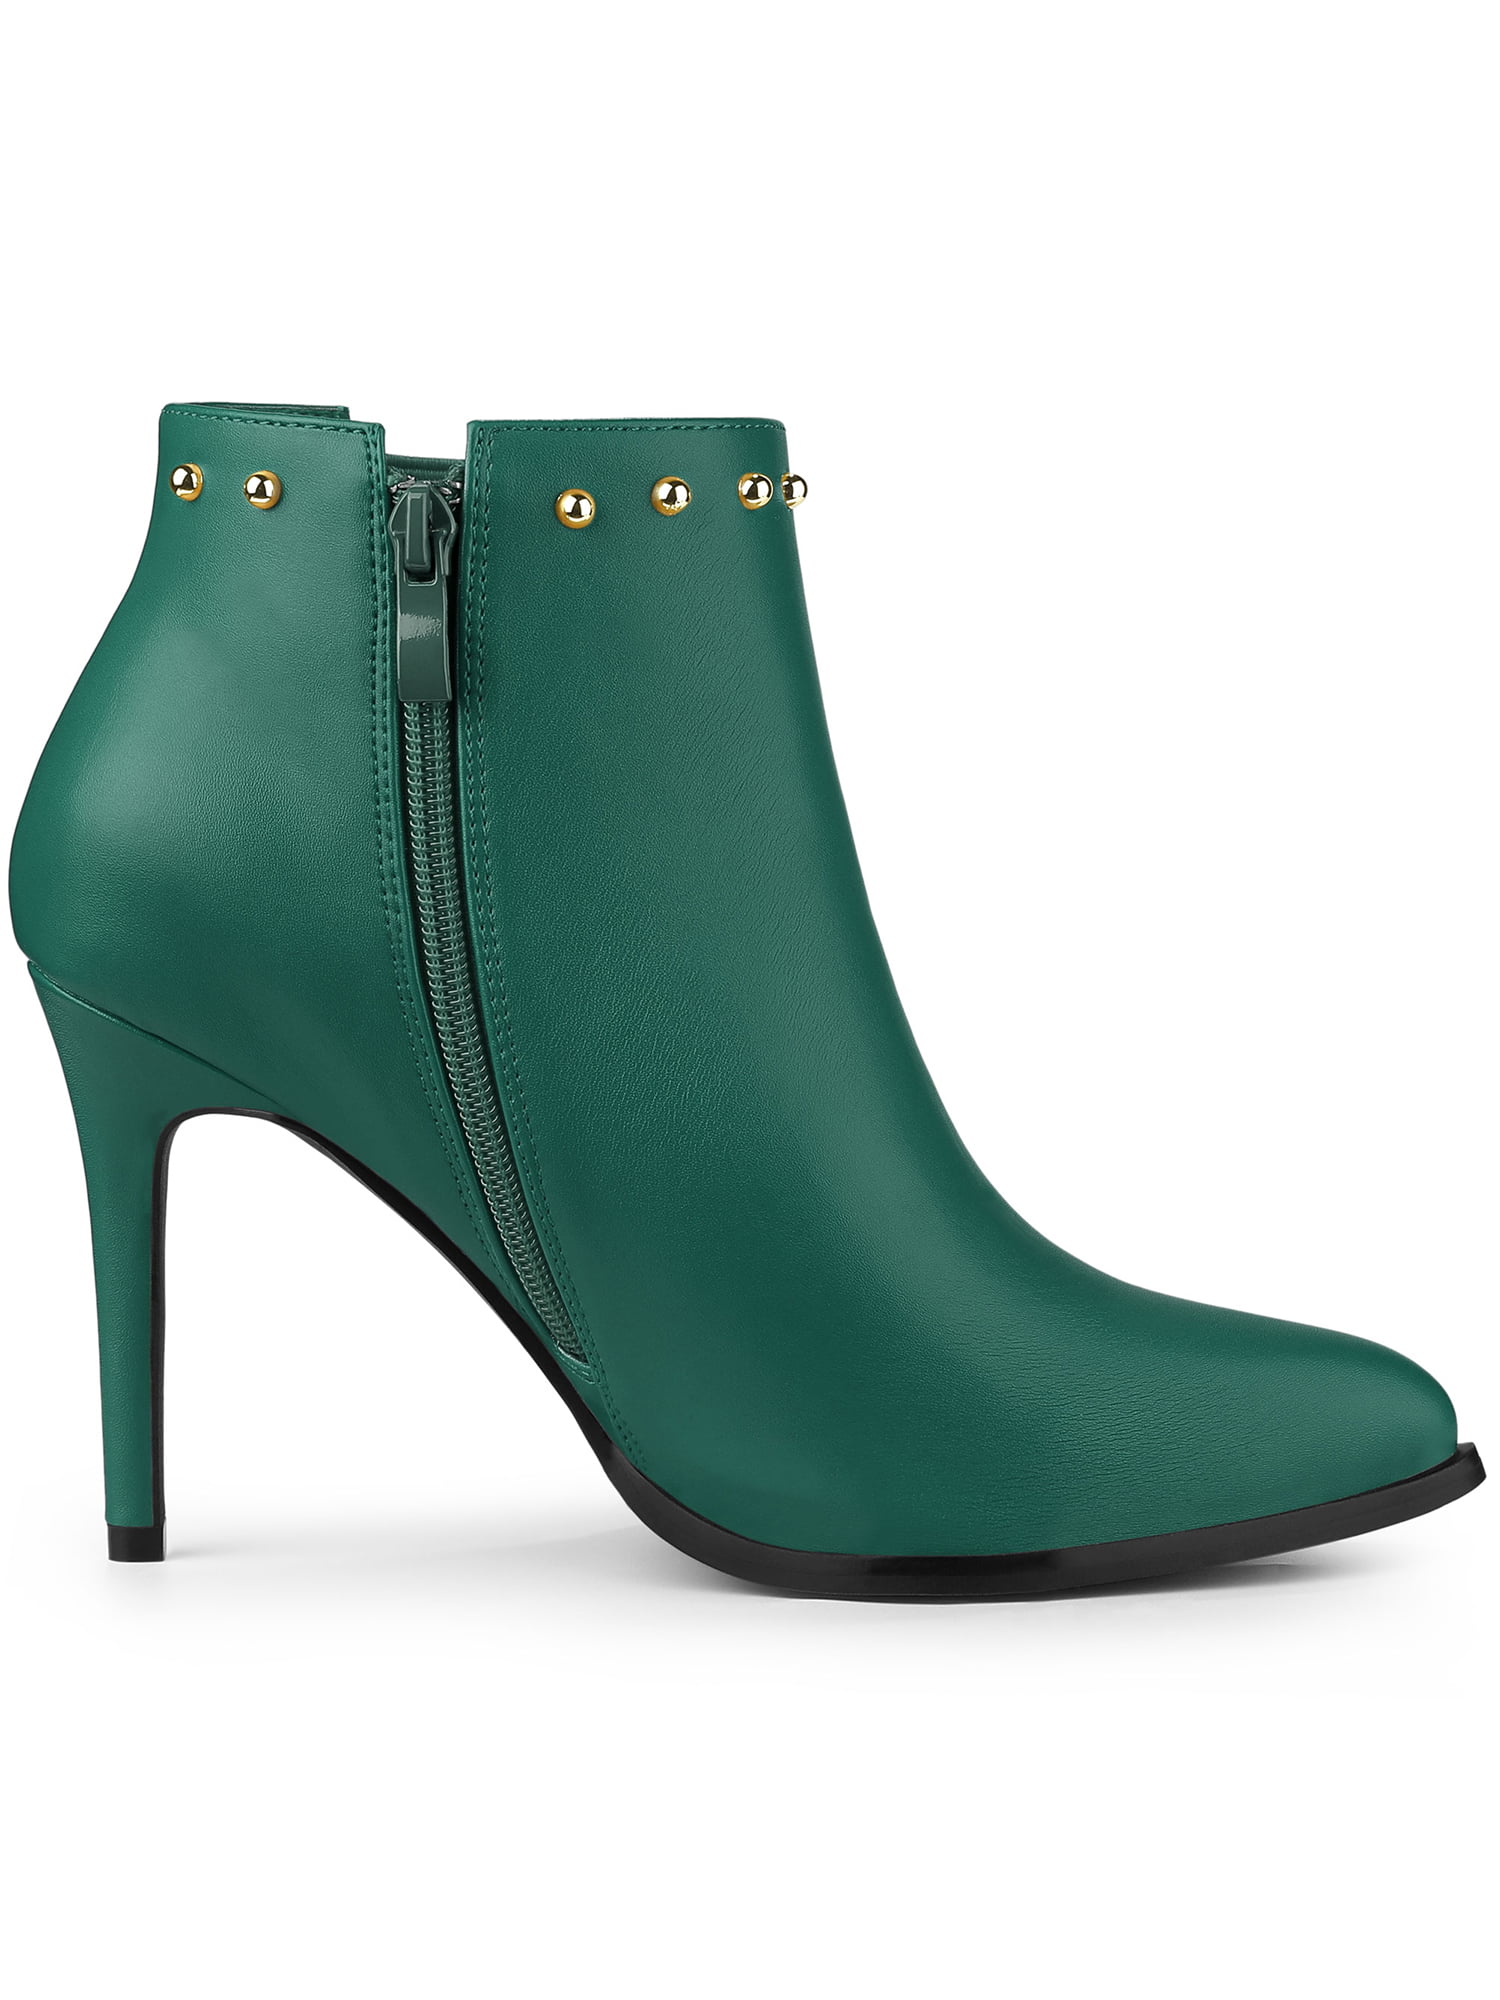 ASOS DESIGN Eternity high heeled ankle boots in green | ASOS